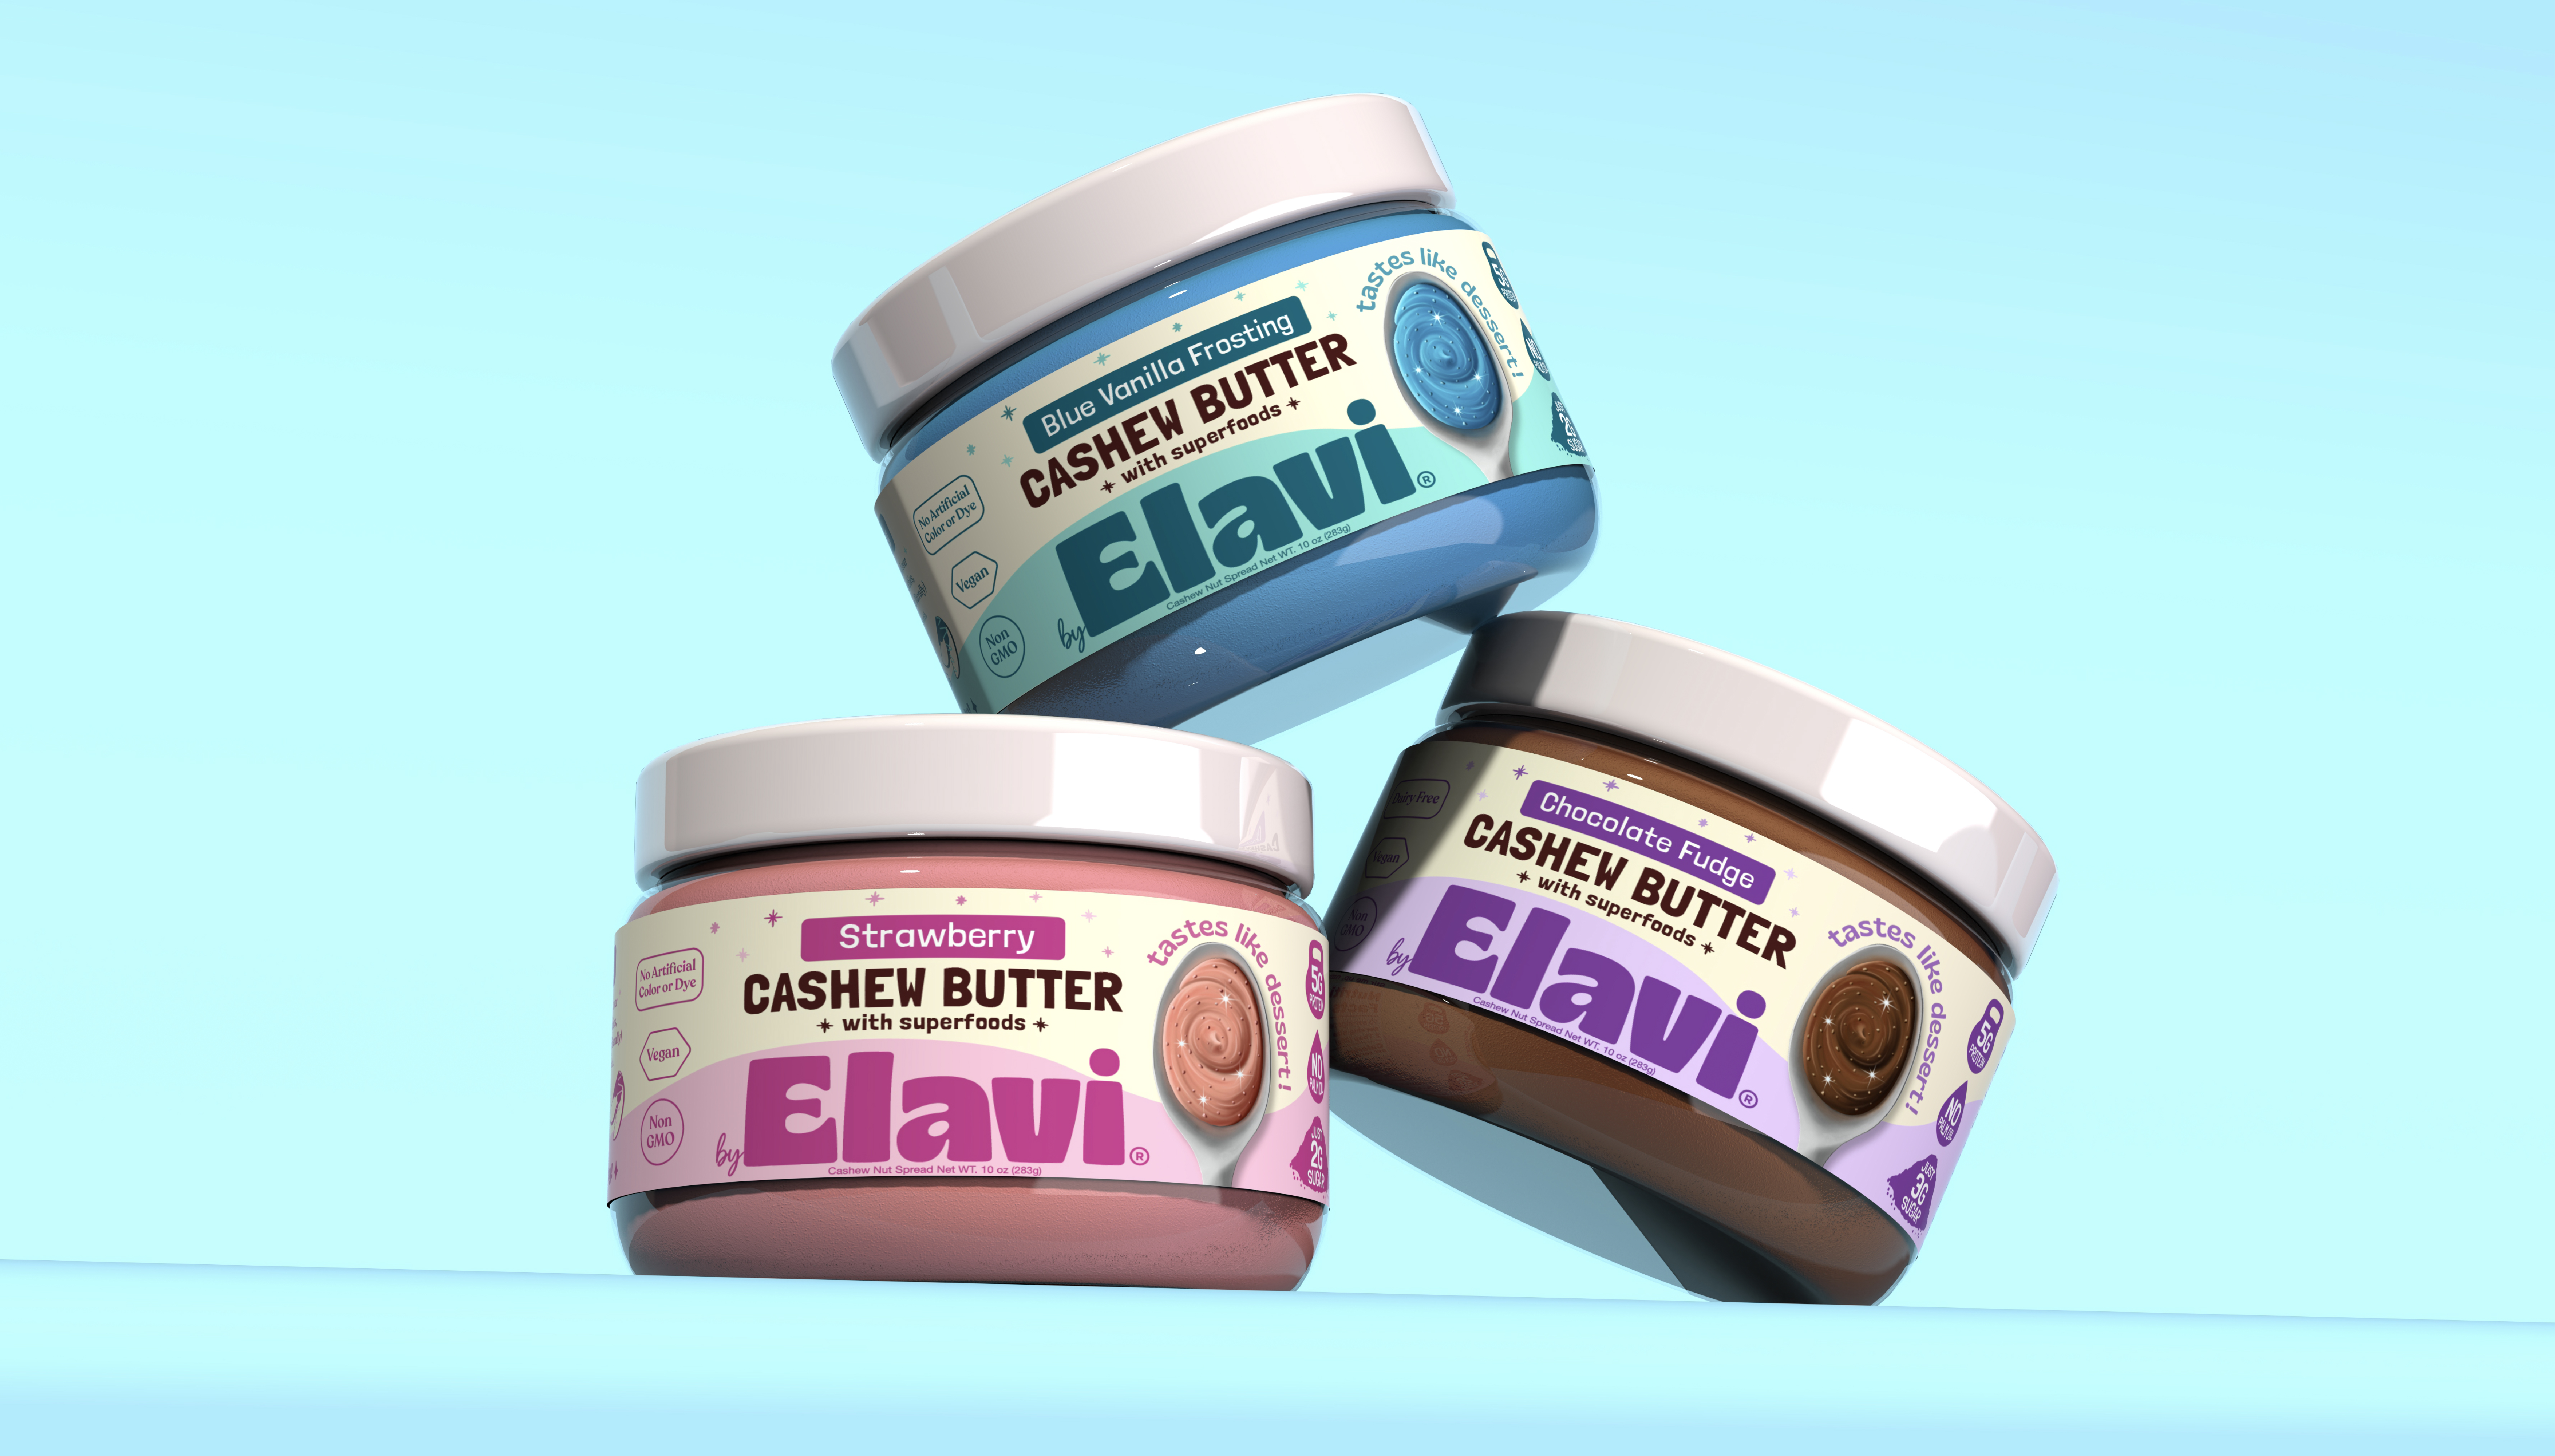 Elavi’s Colorful Cashew Butters Get a Sleek, Youthful Glow-Up